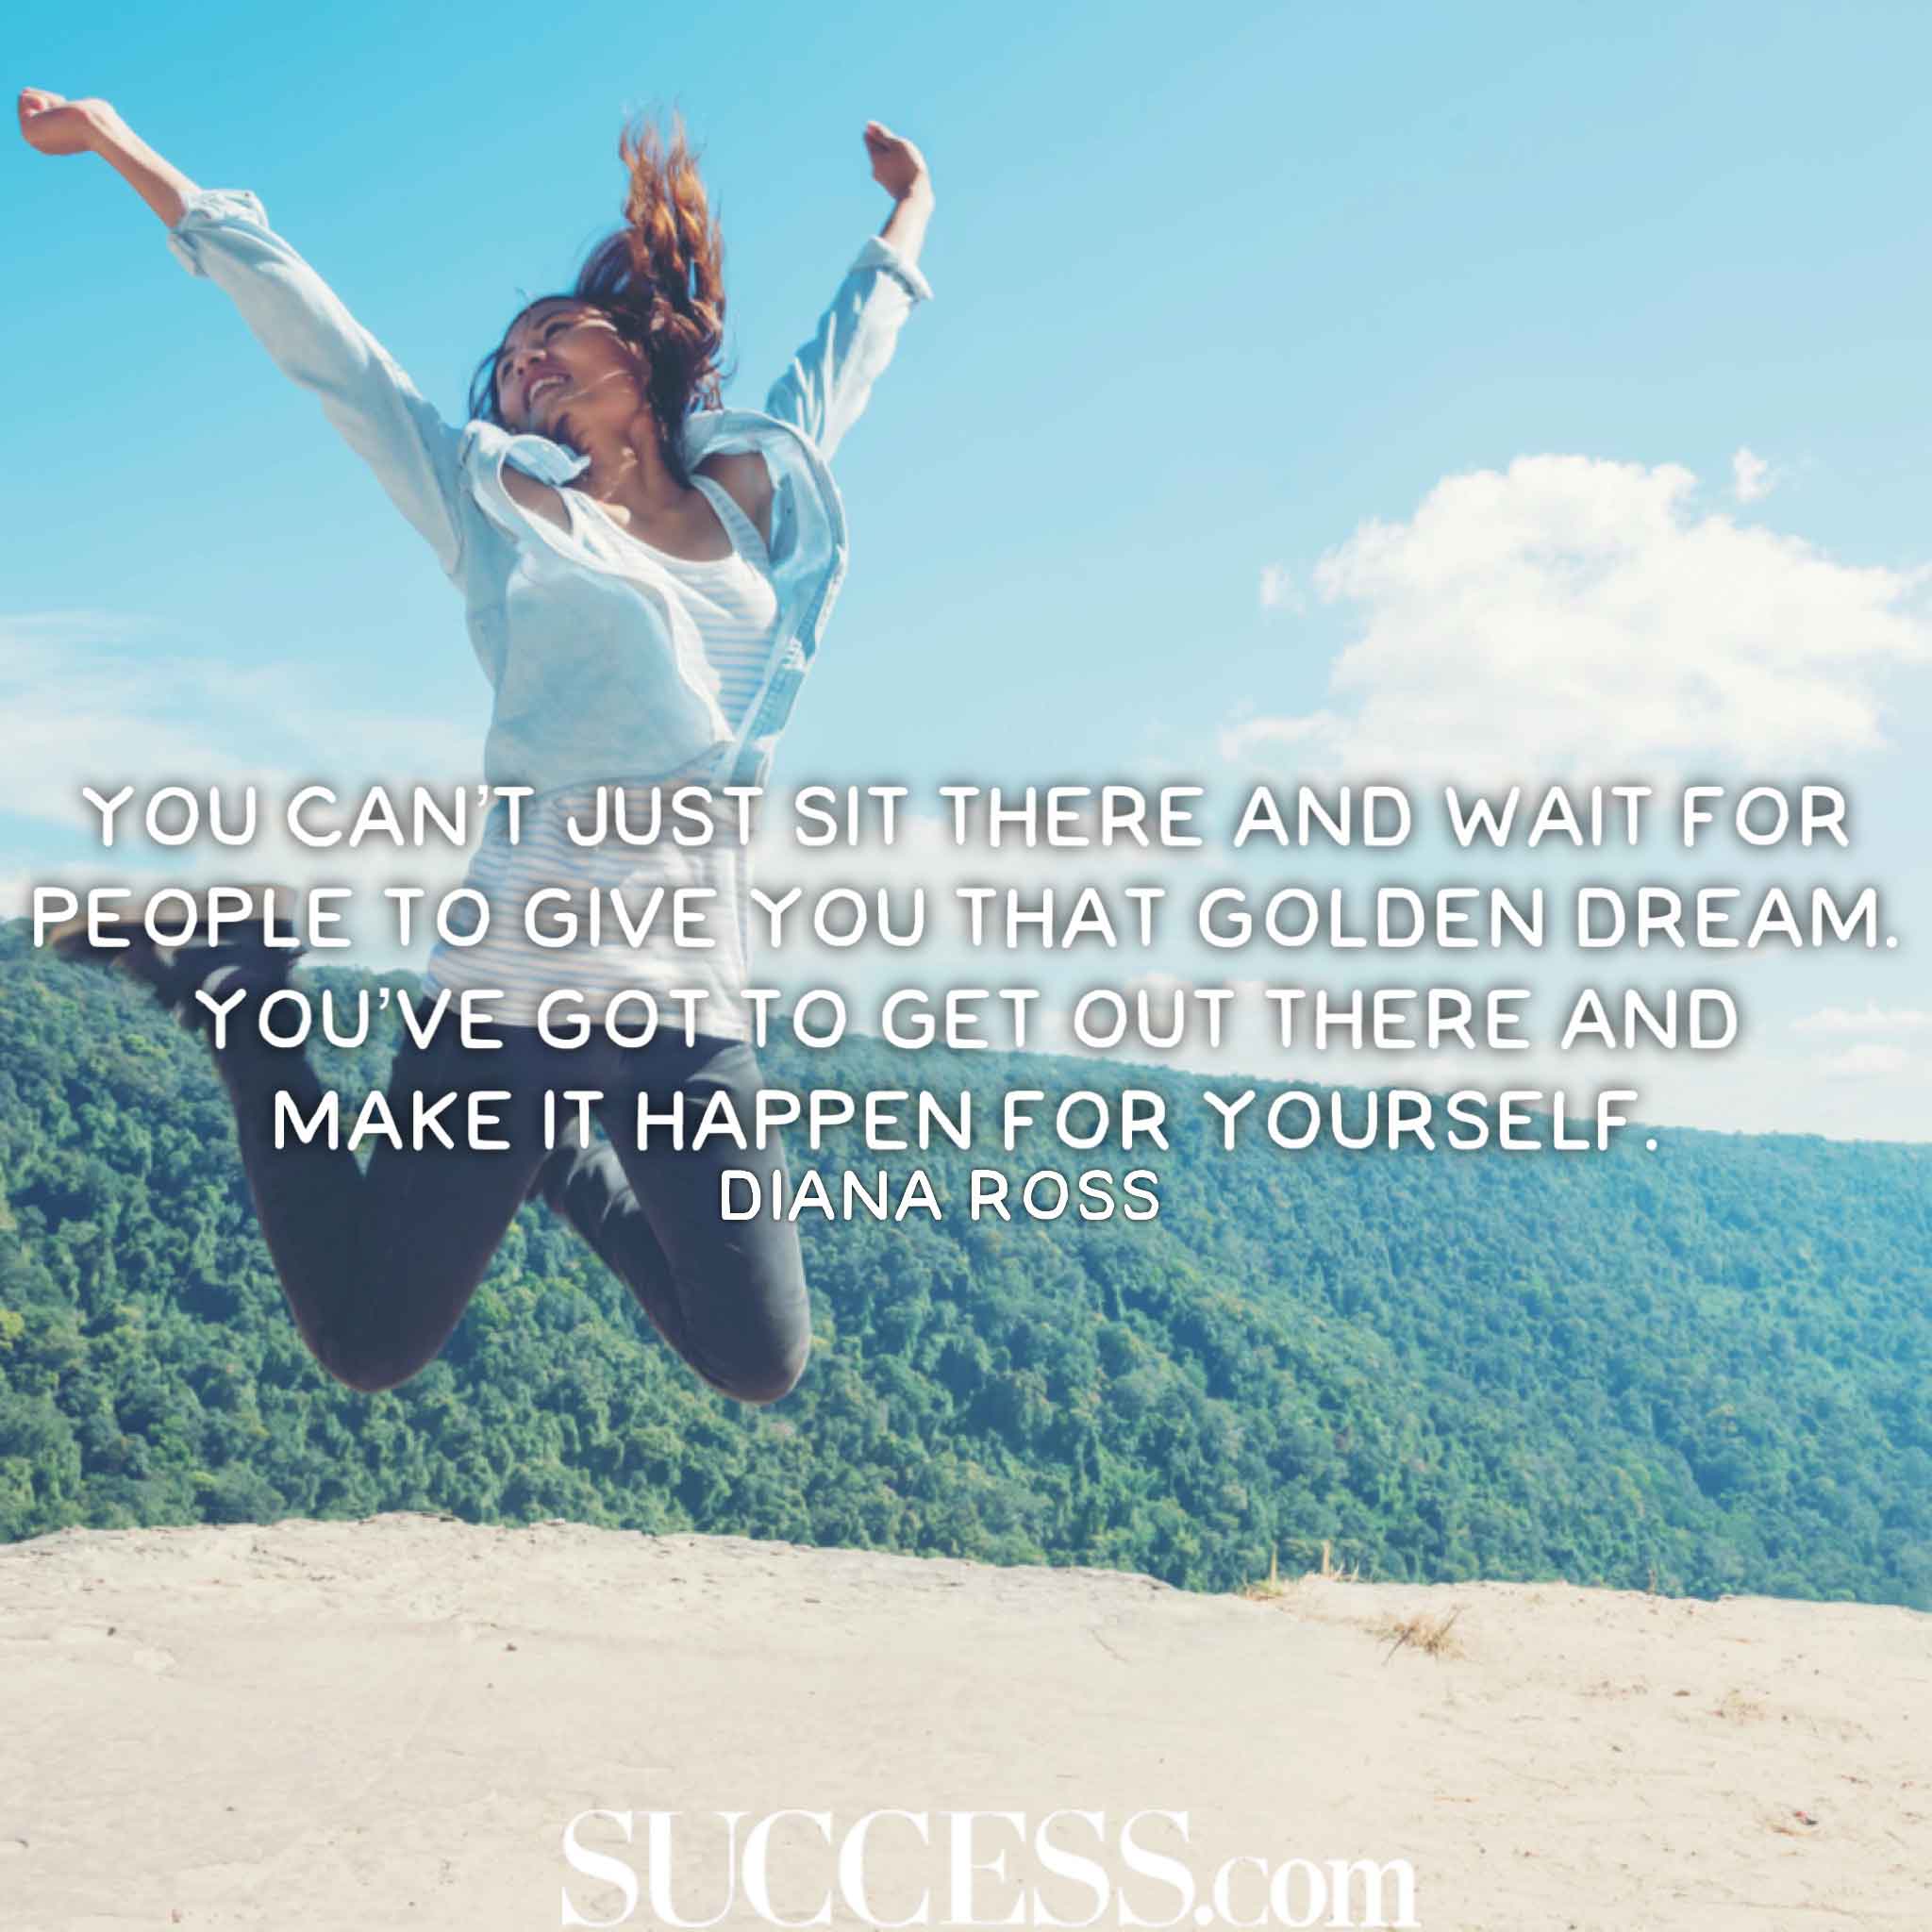 You’ve Got This! 15 Quotes for Getting What You Want